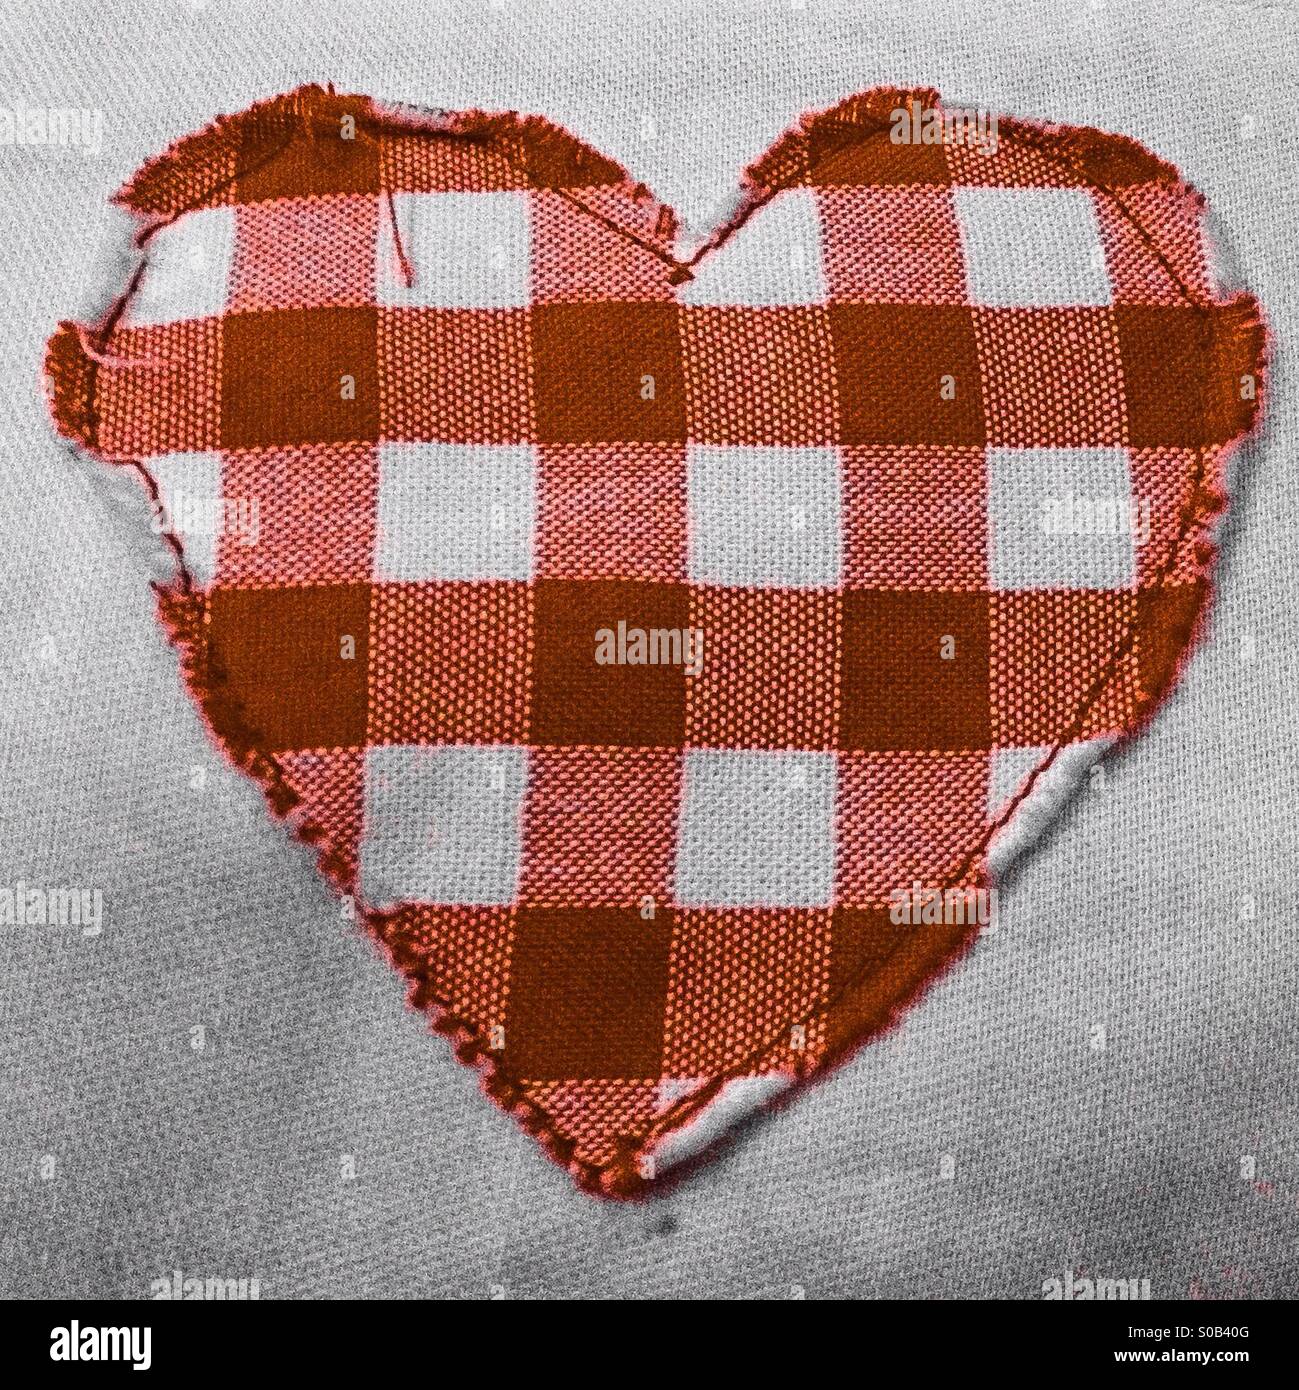 Red and white checkered heart cut out and sewn onto fabric Stock Photo